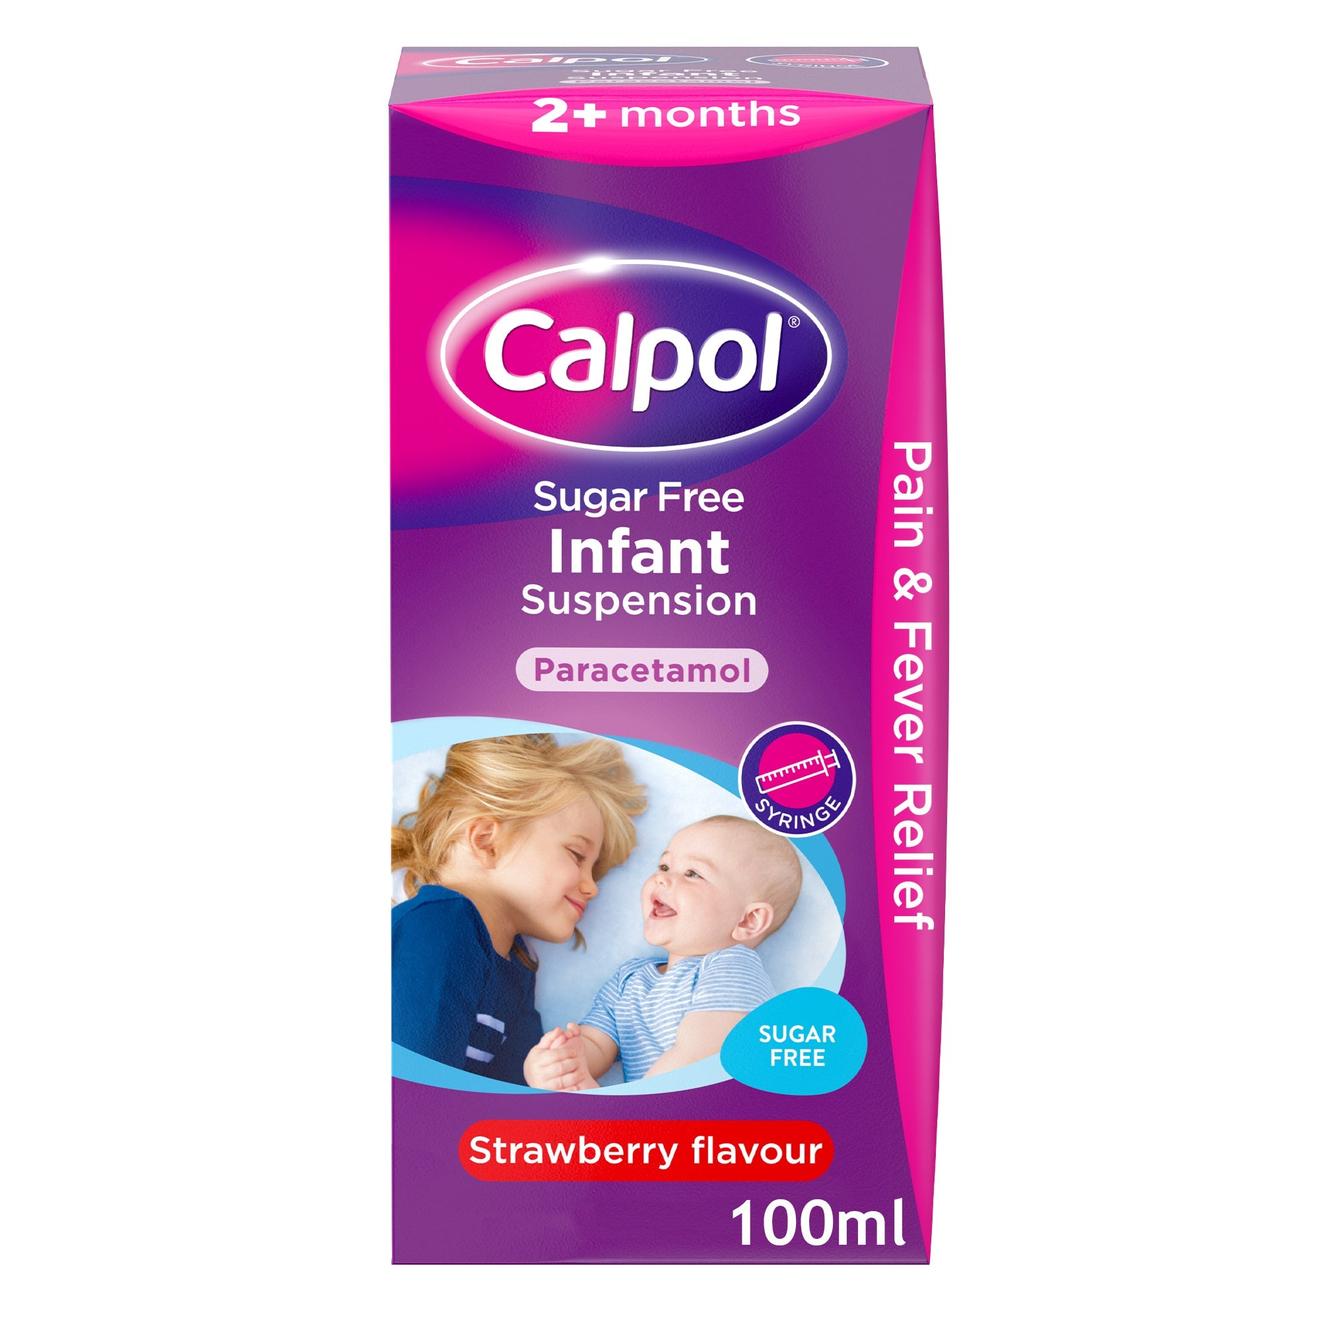 Calpol sugar free infant suspension strawberry flavour 2+ months offers at £459 in Lloyds Pharmacy